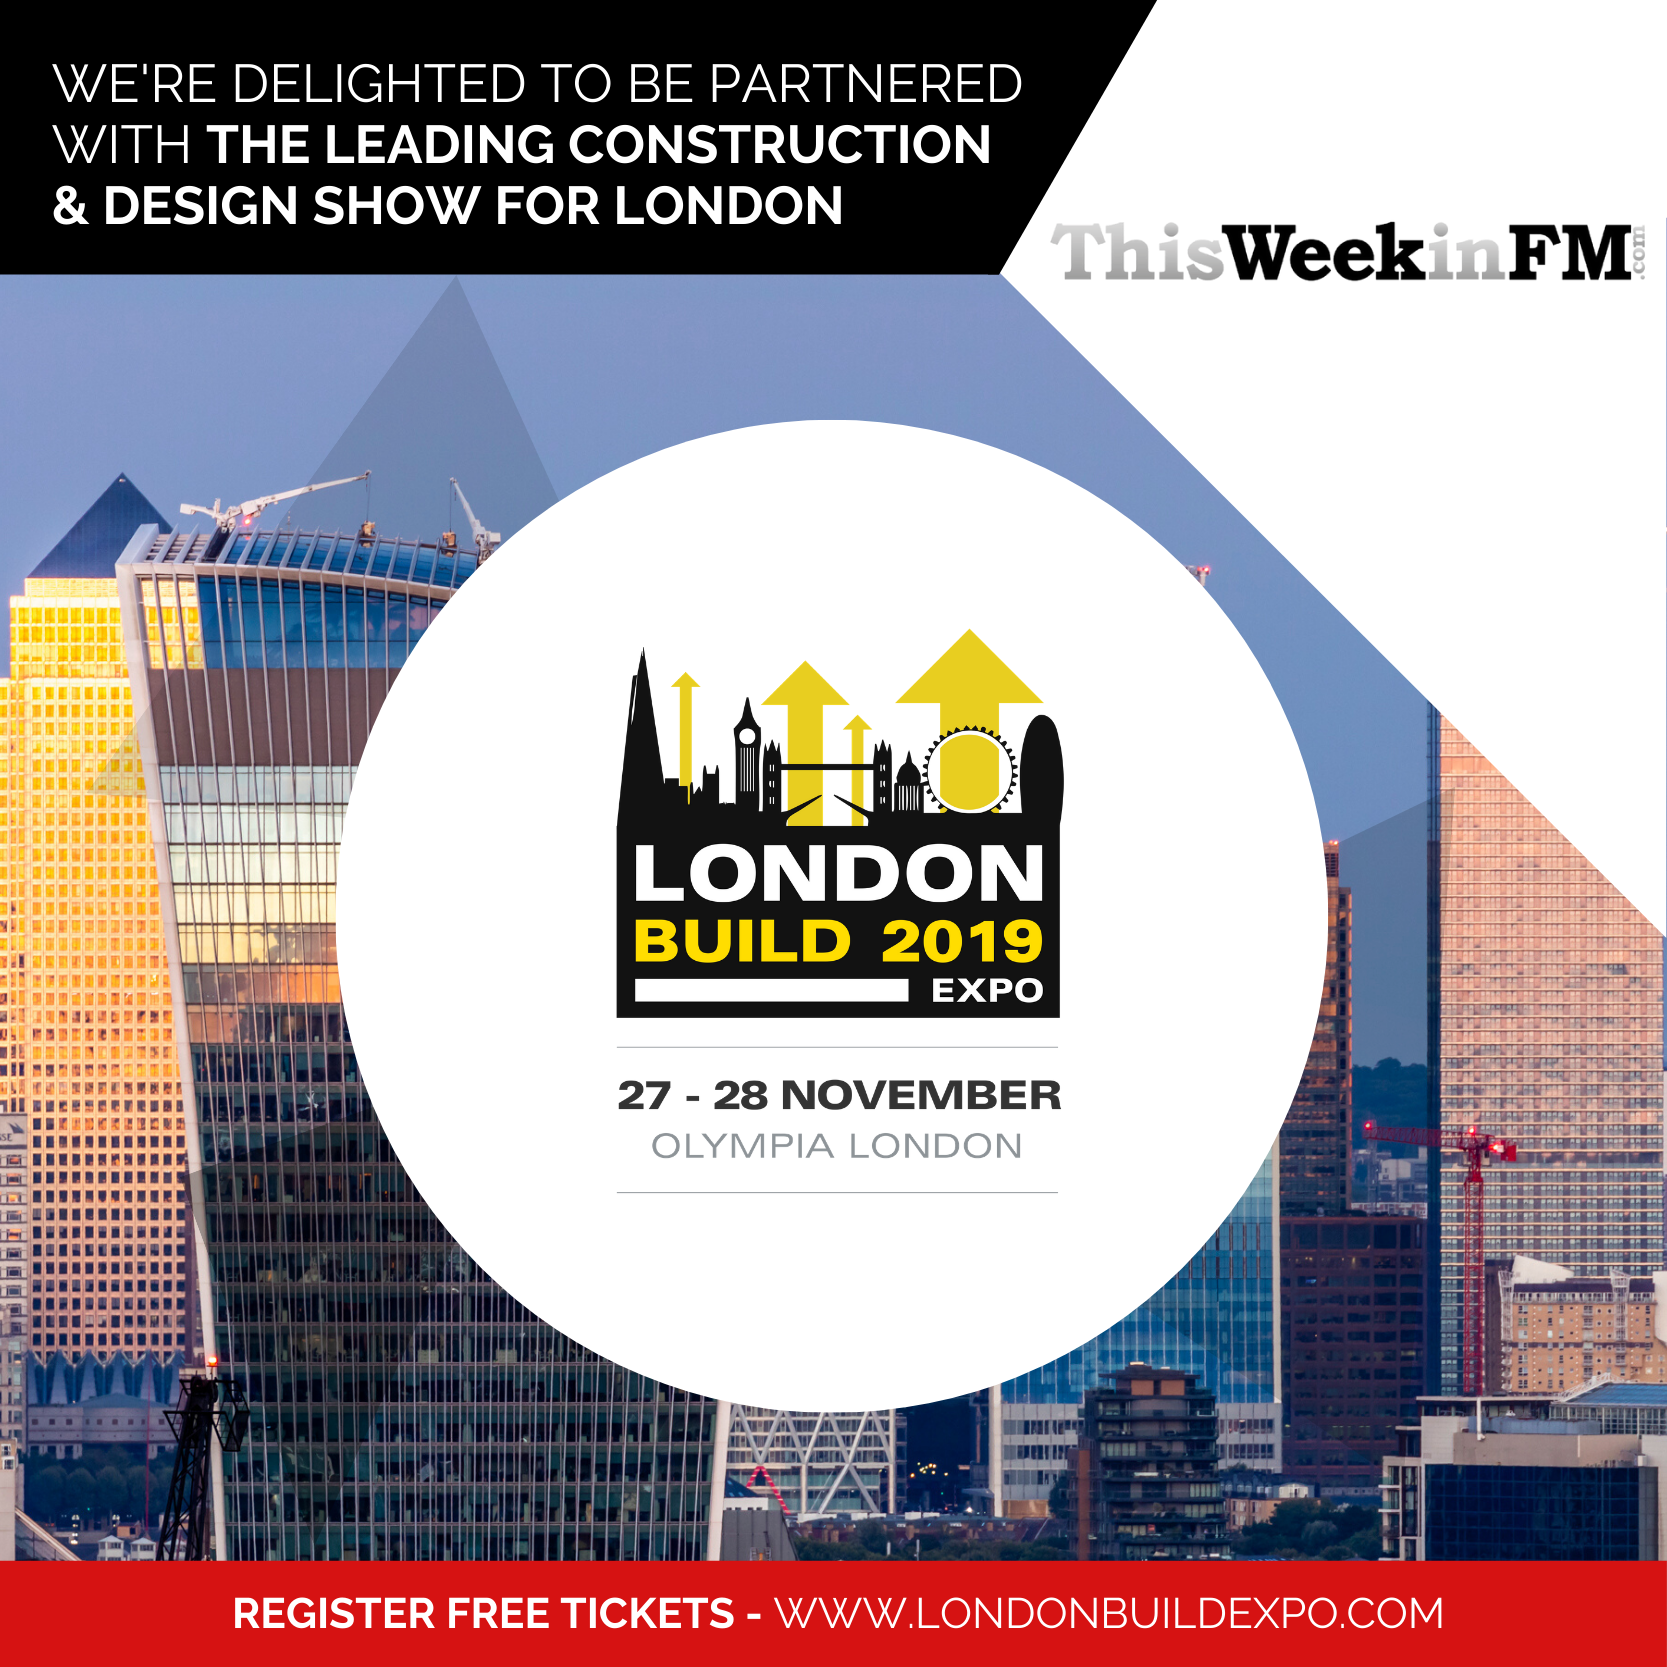 ThisWeekinFM has partnered with the London Build exhibition - November 27-28.